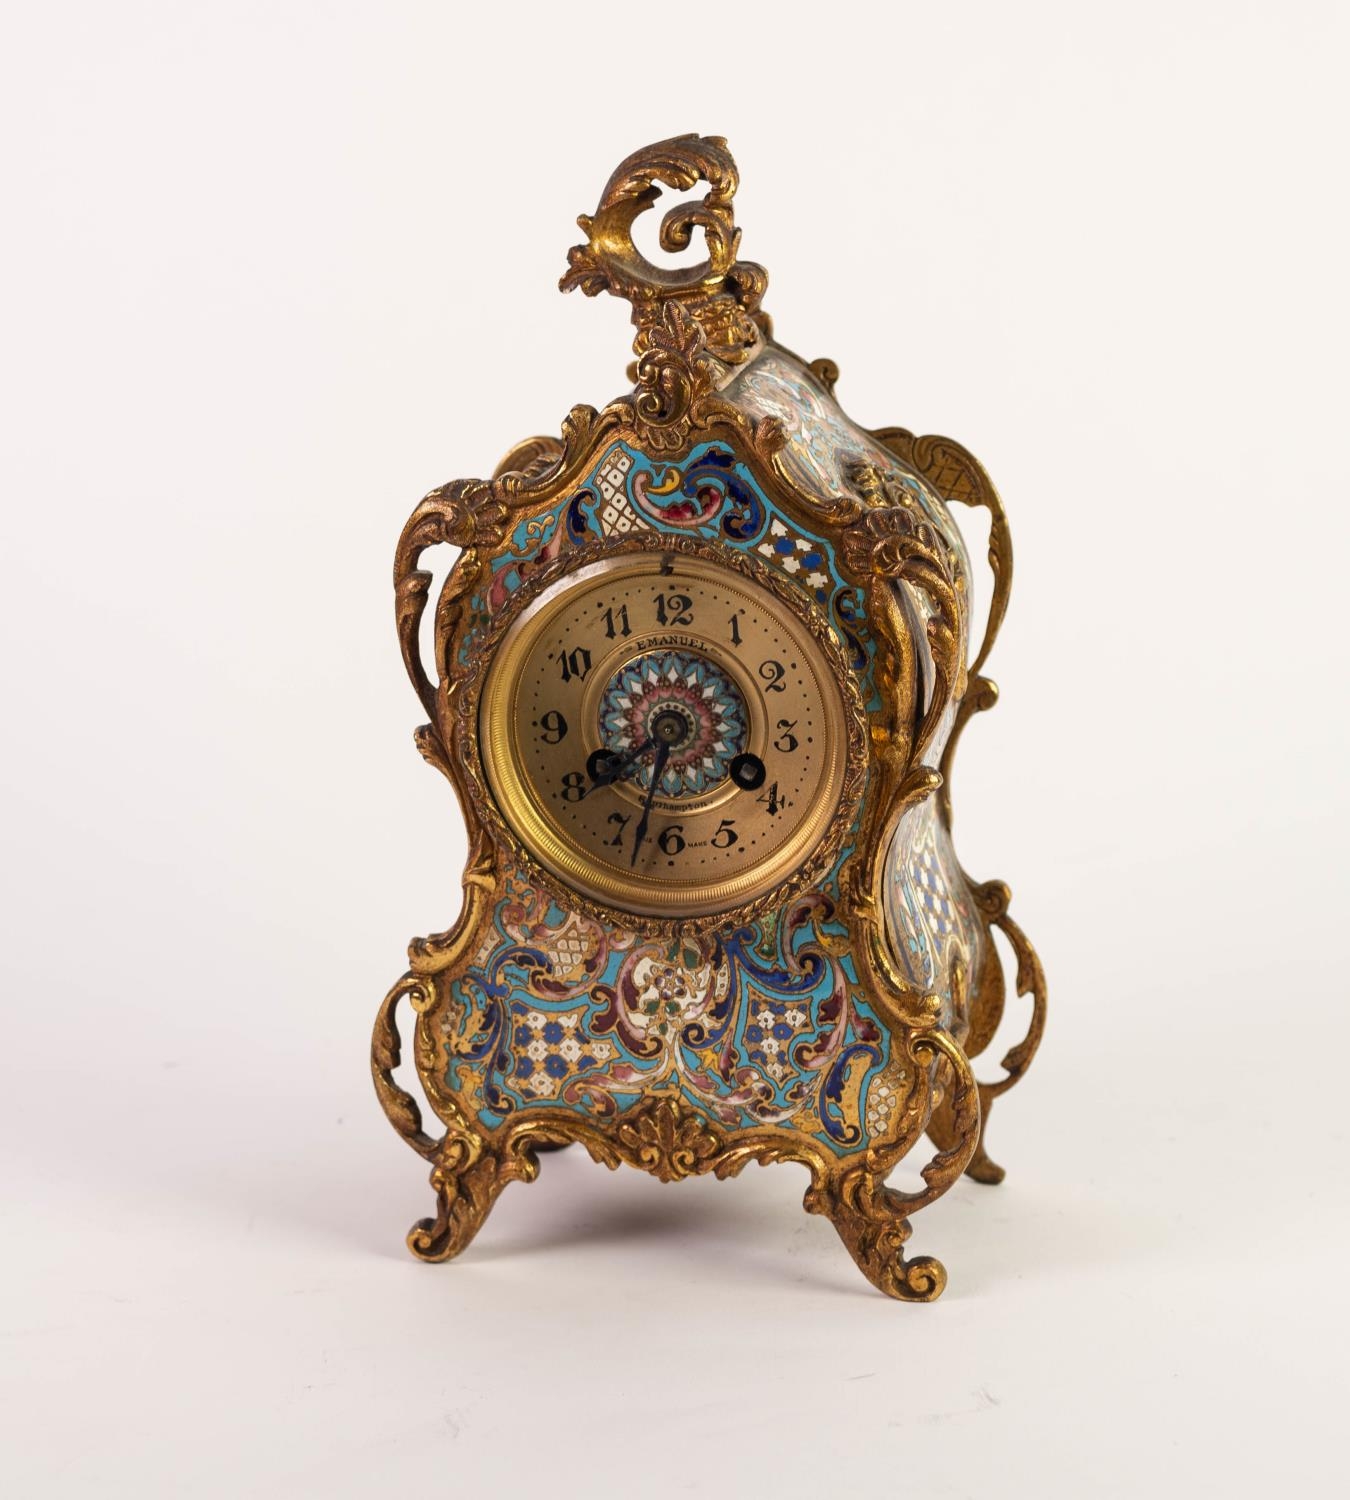 CIRCA 1900 FRENCH GILT METAL AND CHAMPLEVE ENAMEL ROCOCO REVIVAL CASED MANTEL CLOCK, the movement by - Image 2 of 8